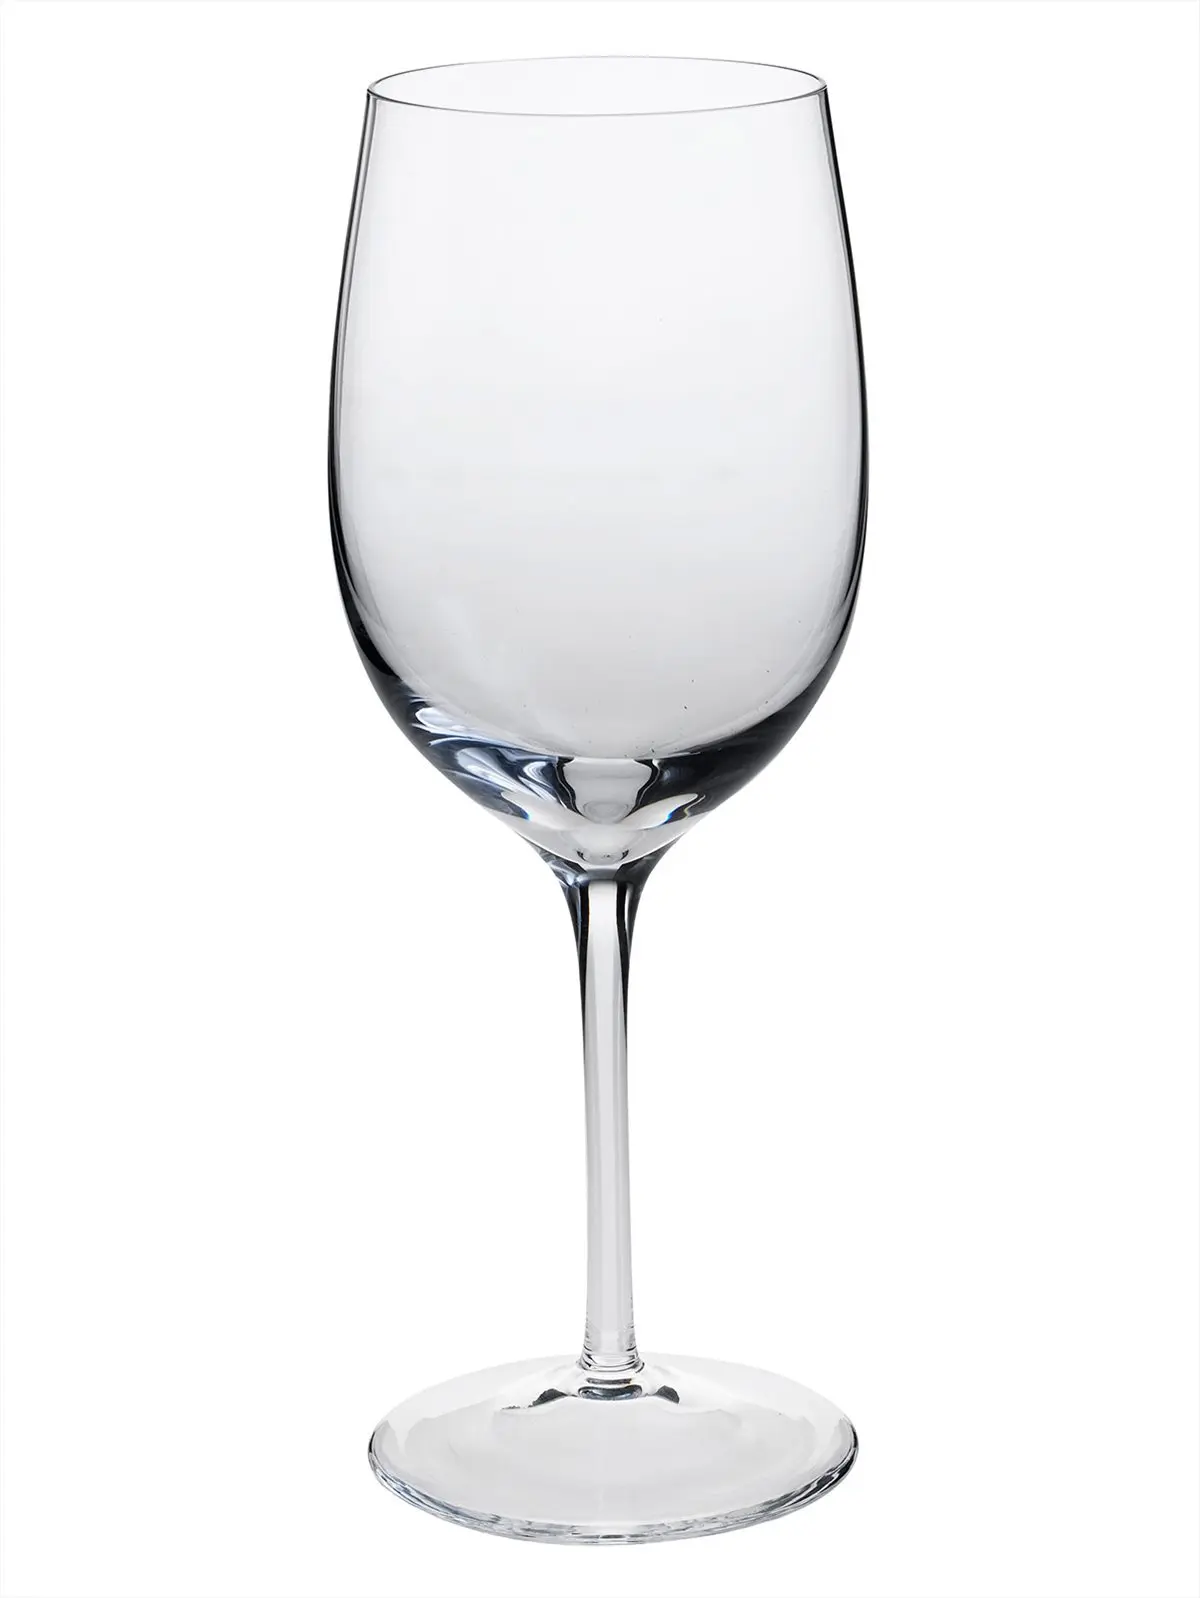 LaModaHome Pasabahce "Porto" Water Glass and Long Drink Cups Unique High Quality Drinking for Tumbler Kitchen